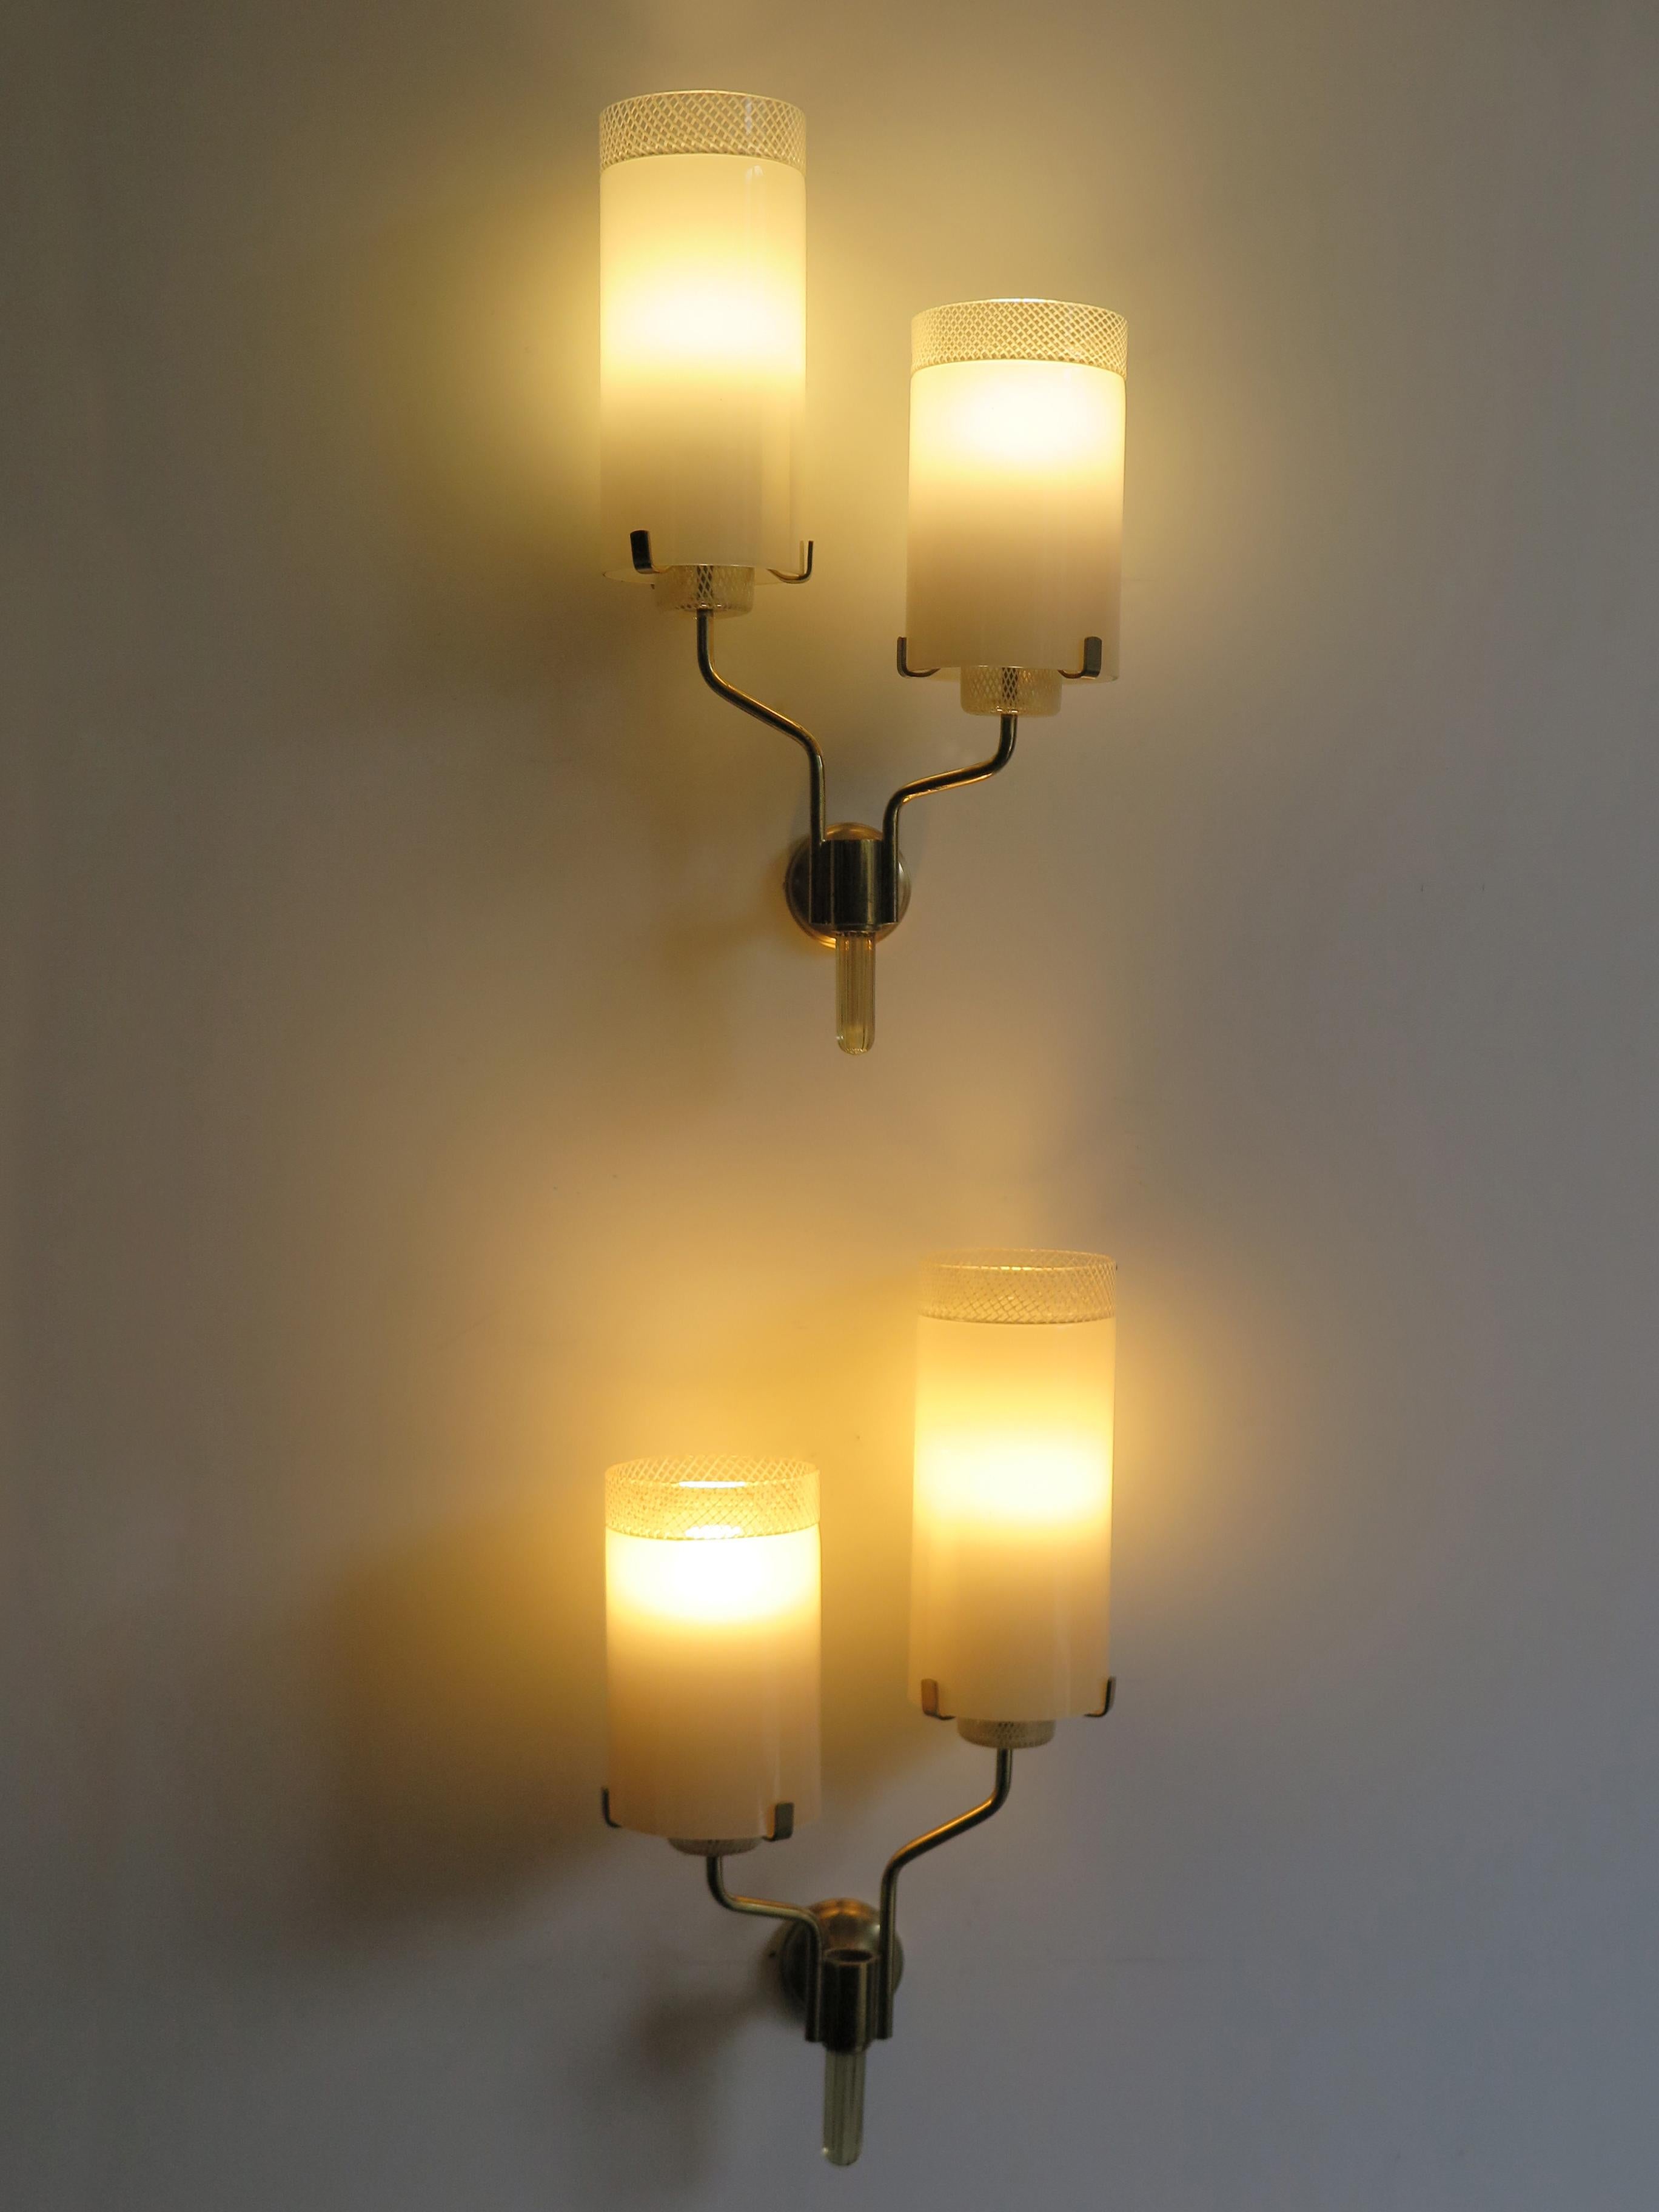 Italian Mid-Century Modern design sconces wall lamps with Murano glass diffusers, brass frame and thick glass detail, 1950s.
Please note that the lamps are original of the period and this shows normal signs of age and use.